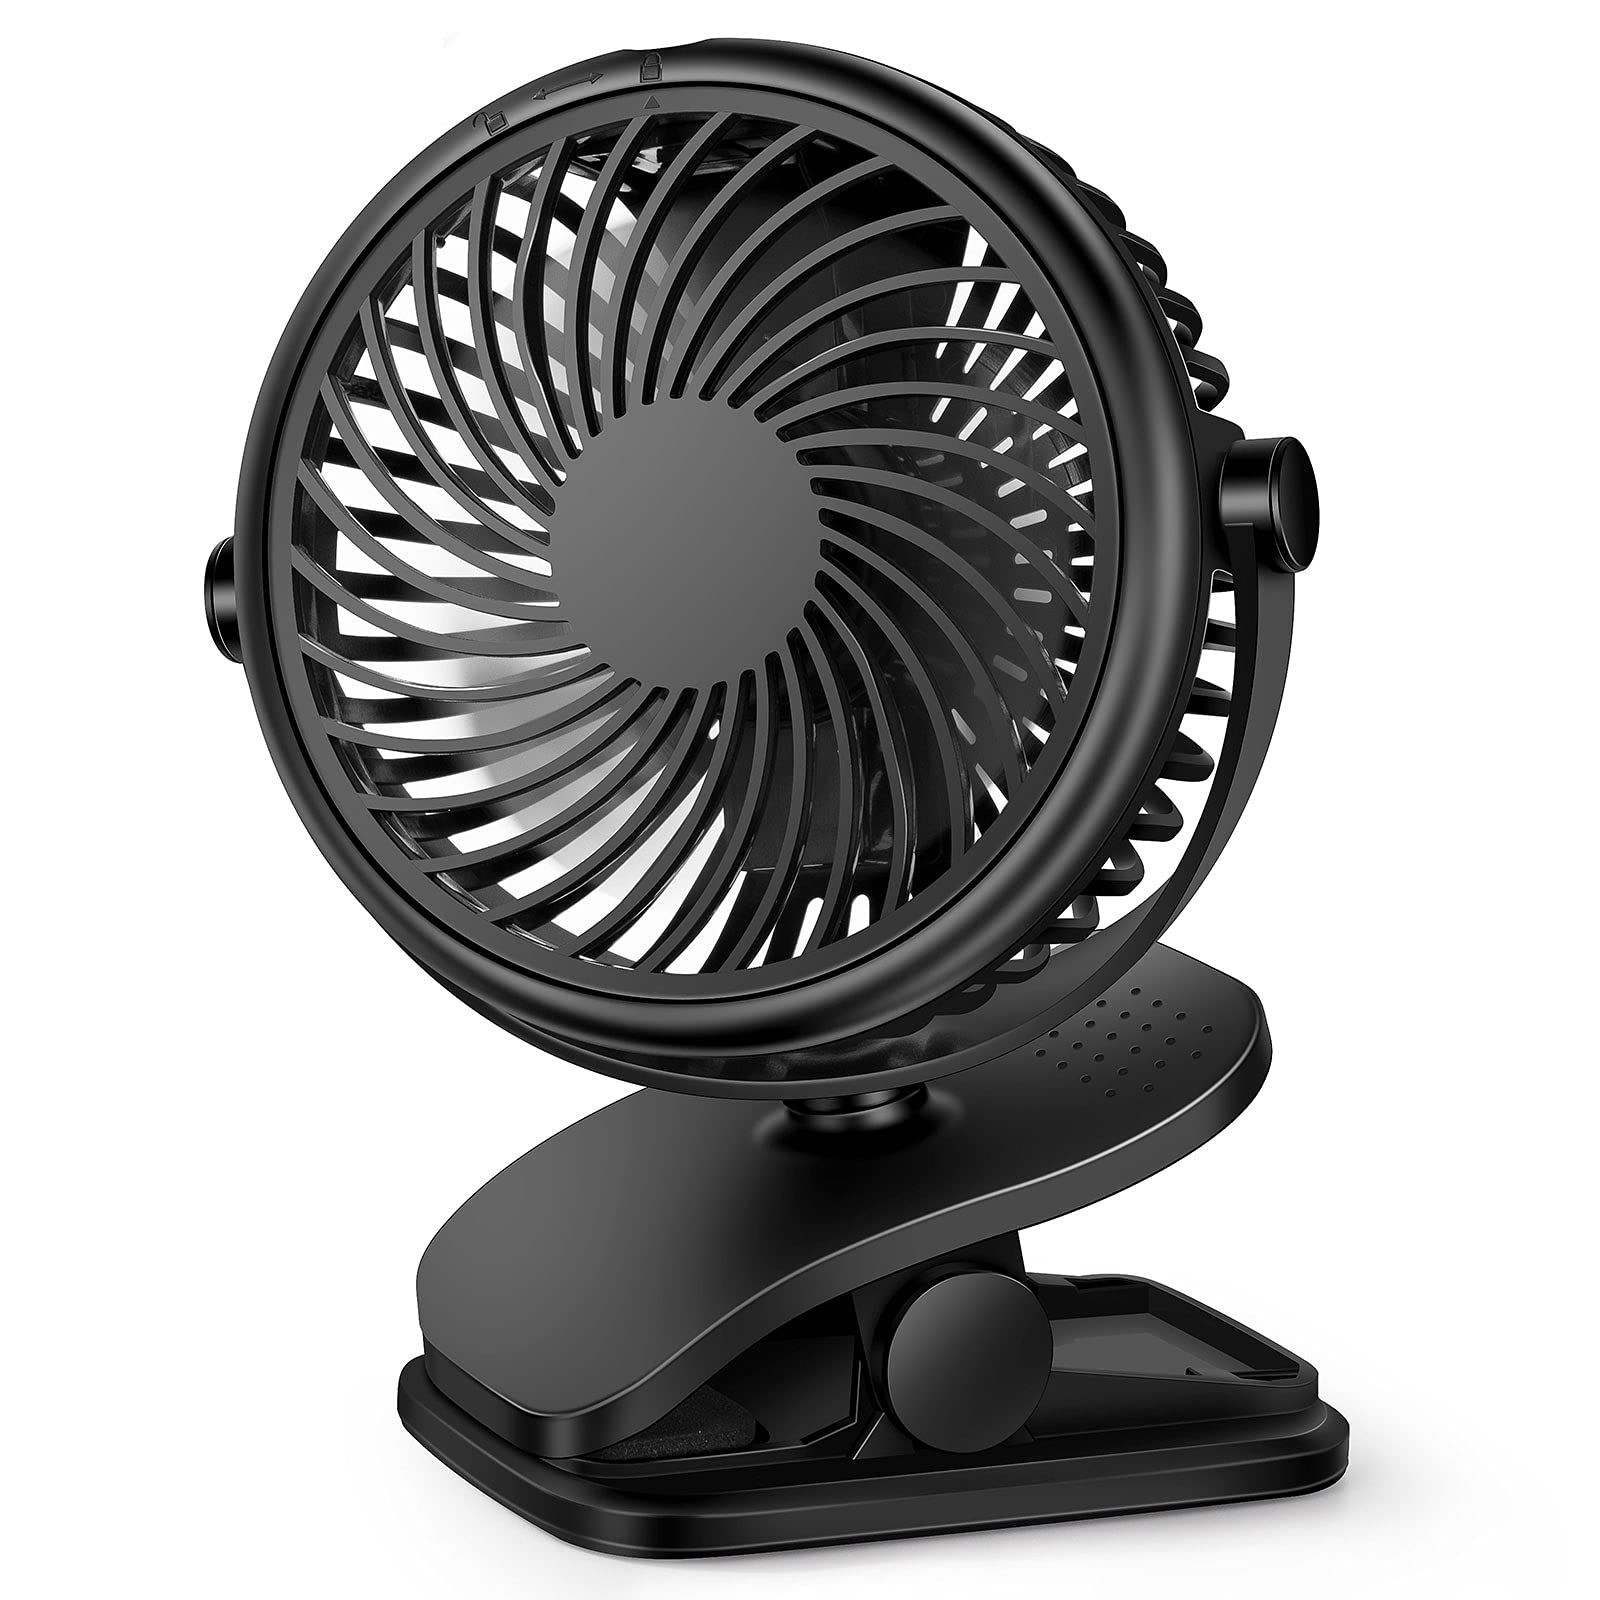 Desk Fan Clip On Fan for Pram, USB Stroller Fan, Rechargeable Portable Table Fans, Personal Desktop Fans with Battery Operated 360° Rotated for Baby PushChairs Bed Office Camping, Holiday Essential